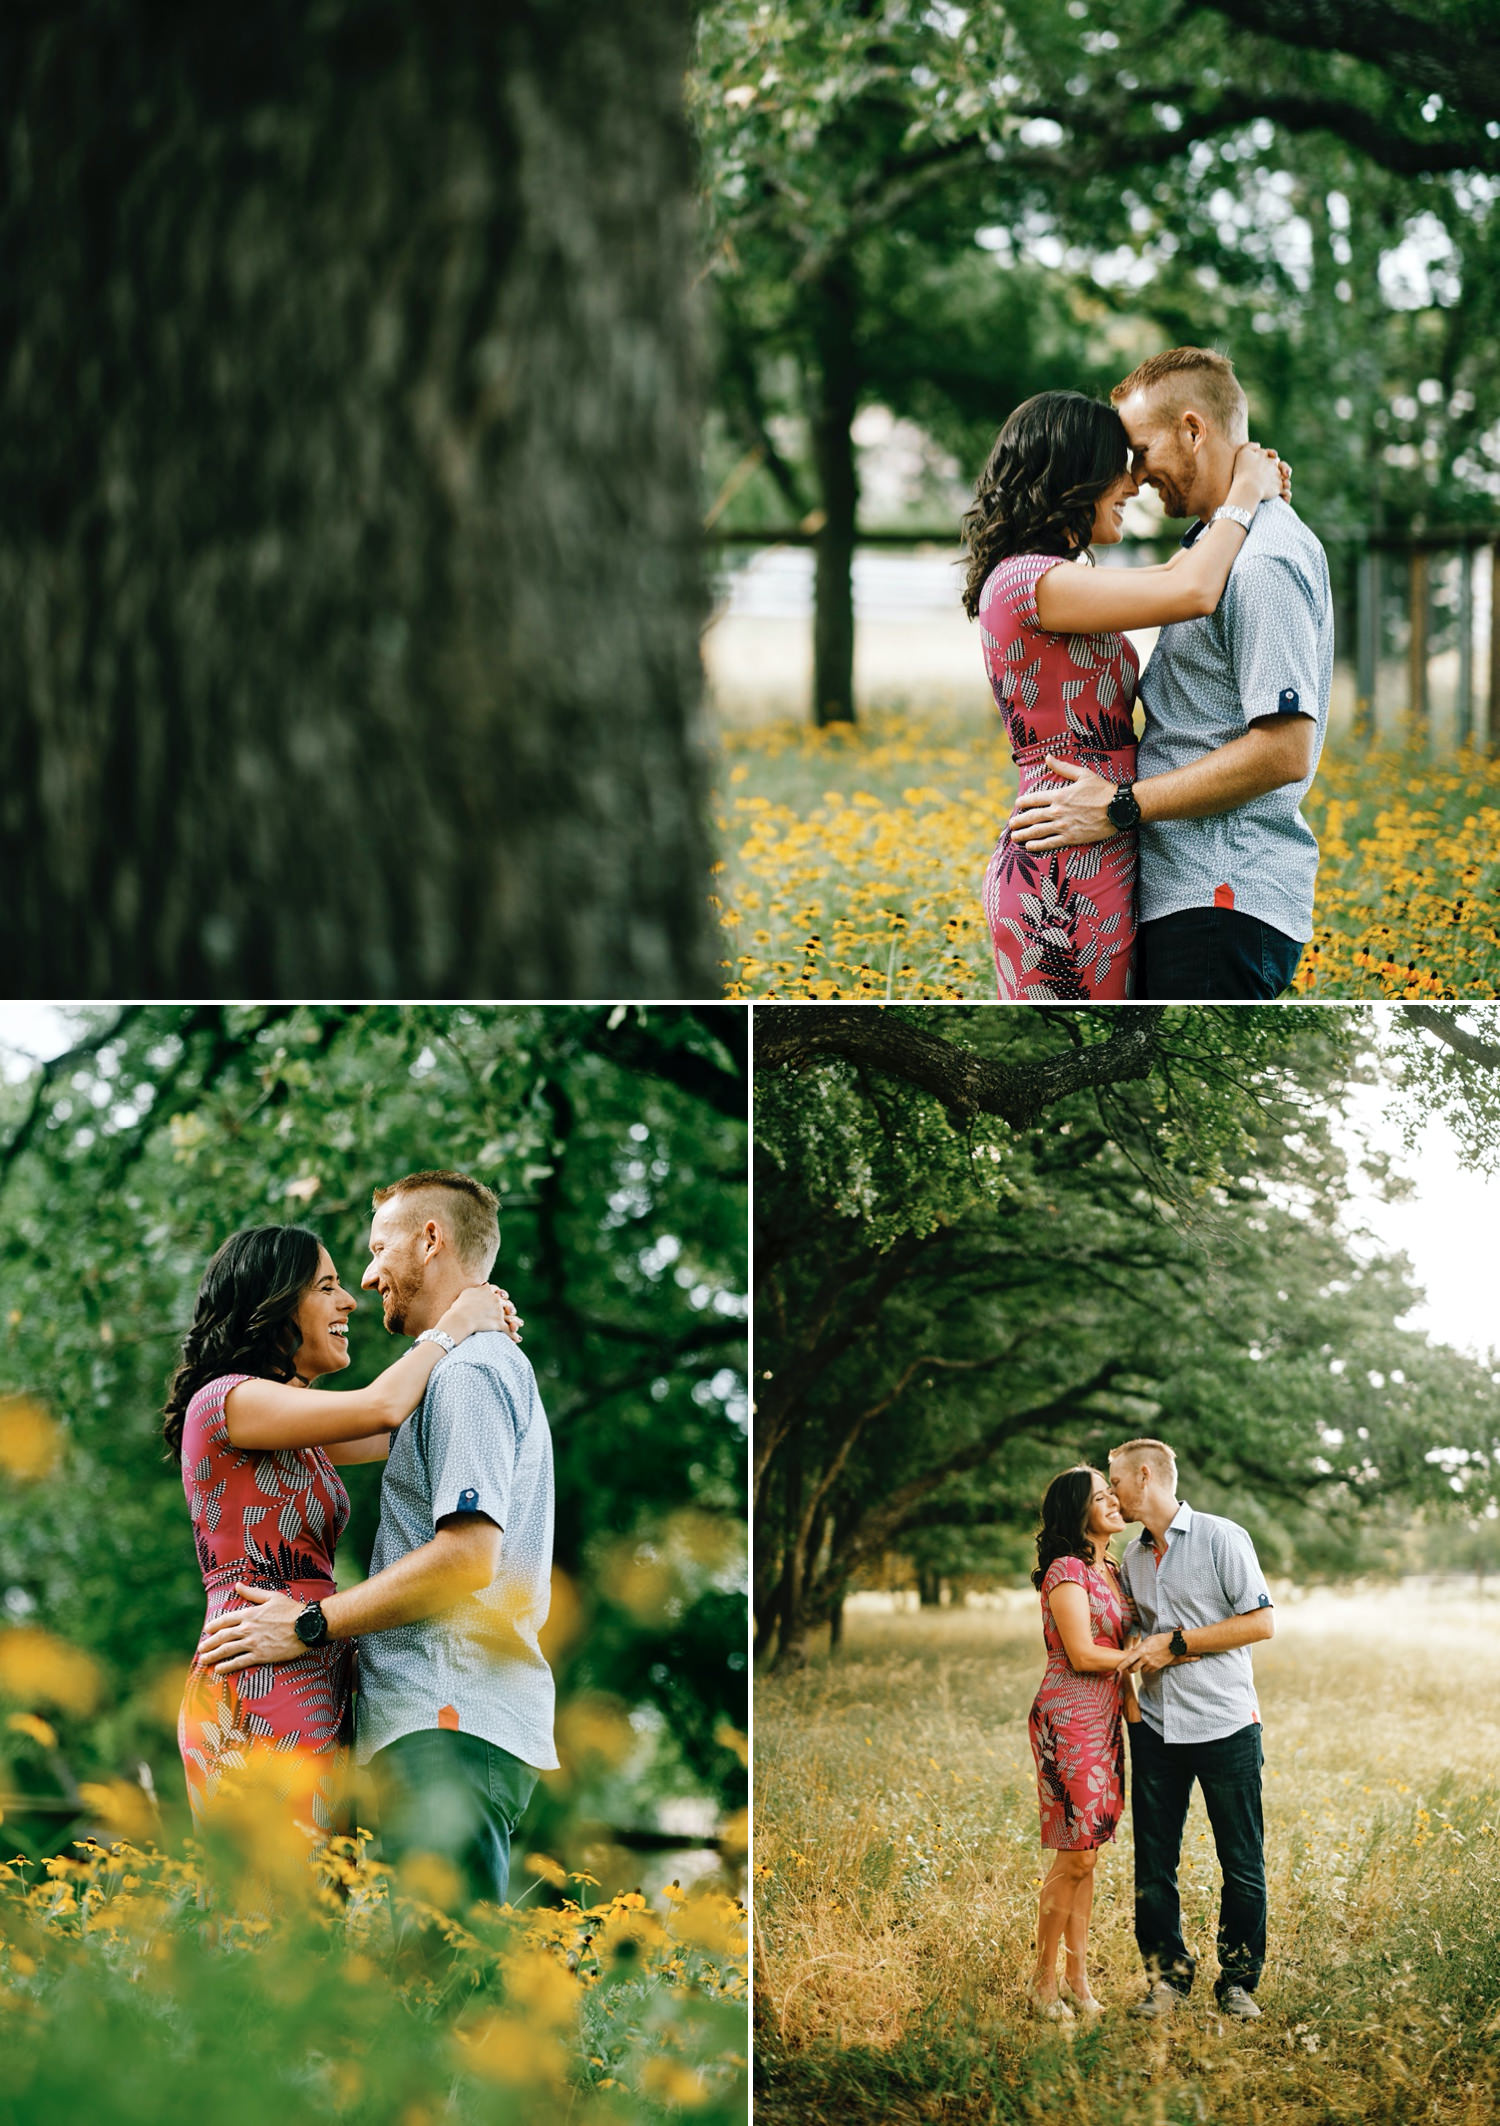 Rusty and Christina's engagement session with Texas Hill Country views by Austin wedding photographers Mercedes Morgan Photography